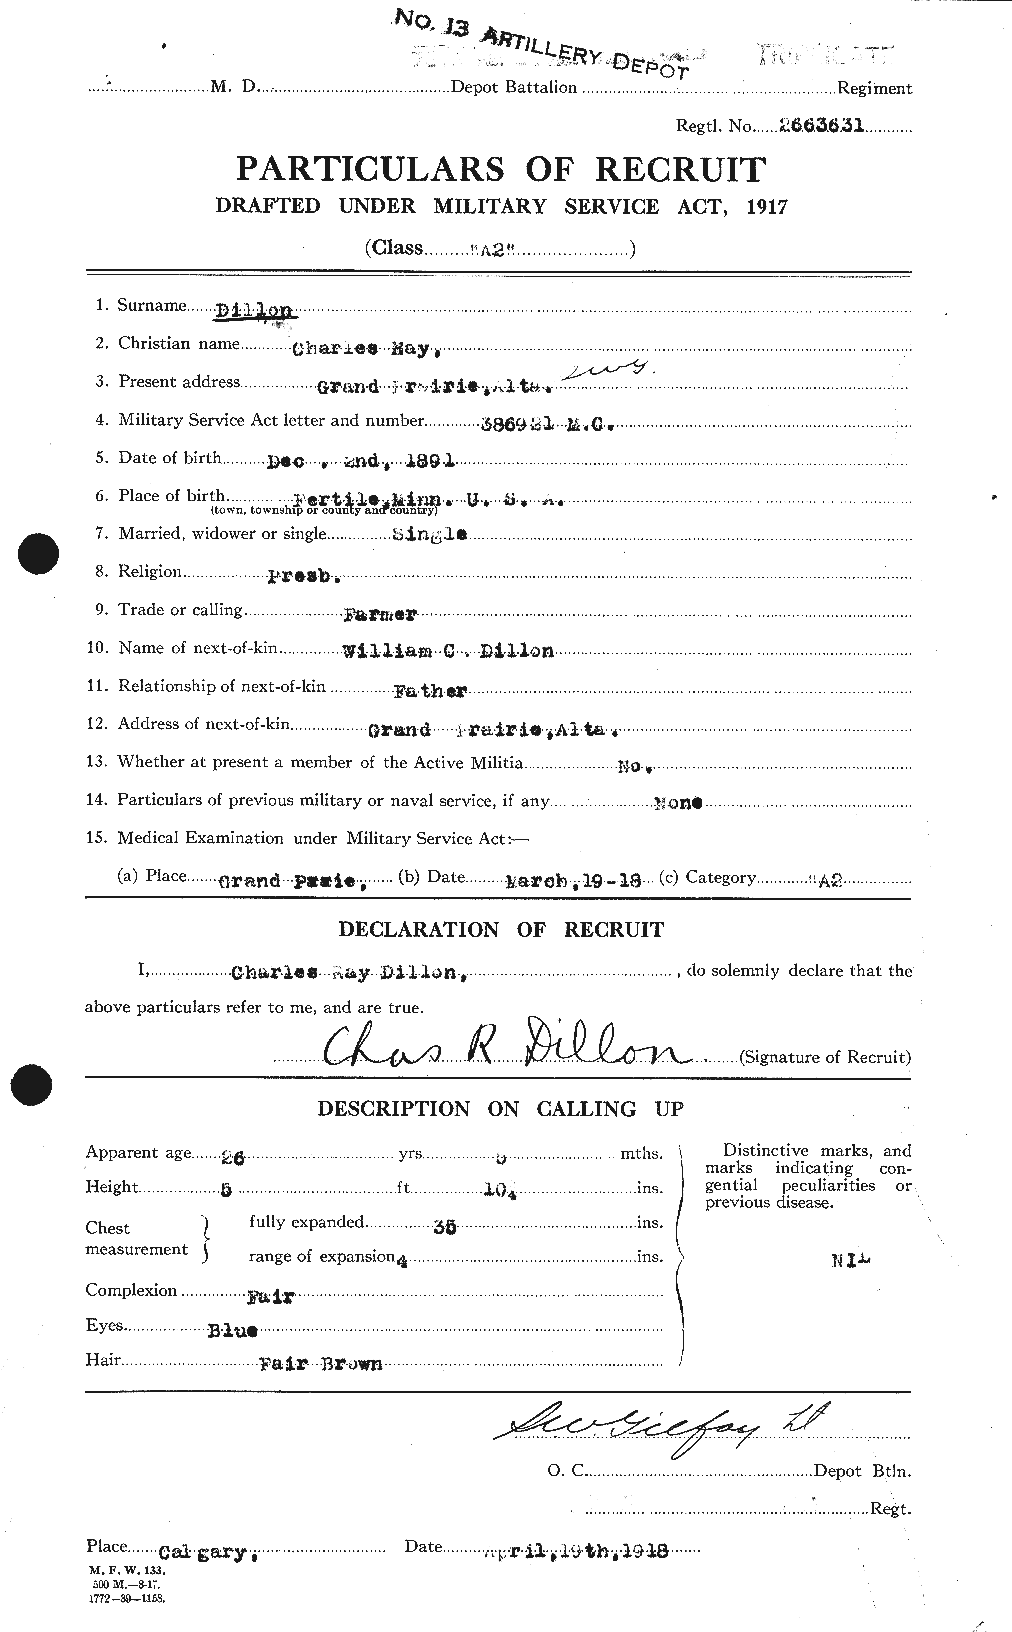 Personnel Records of the First World War - CEF 293660a